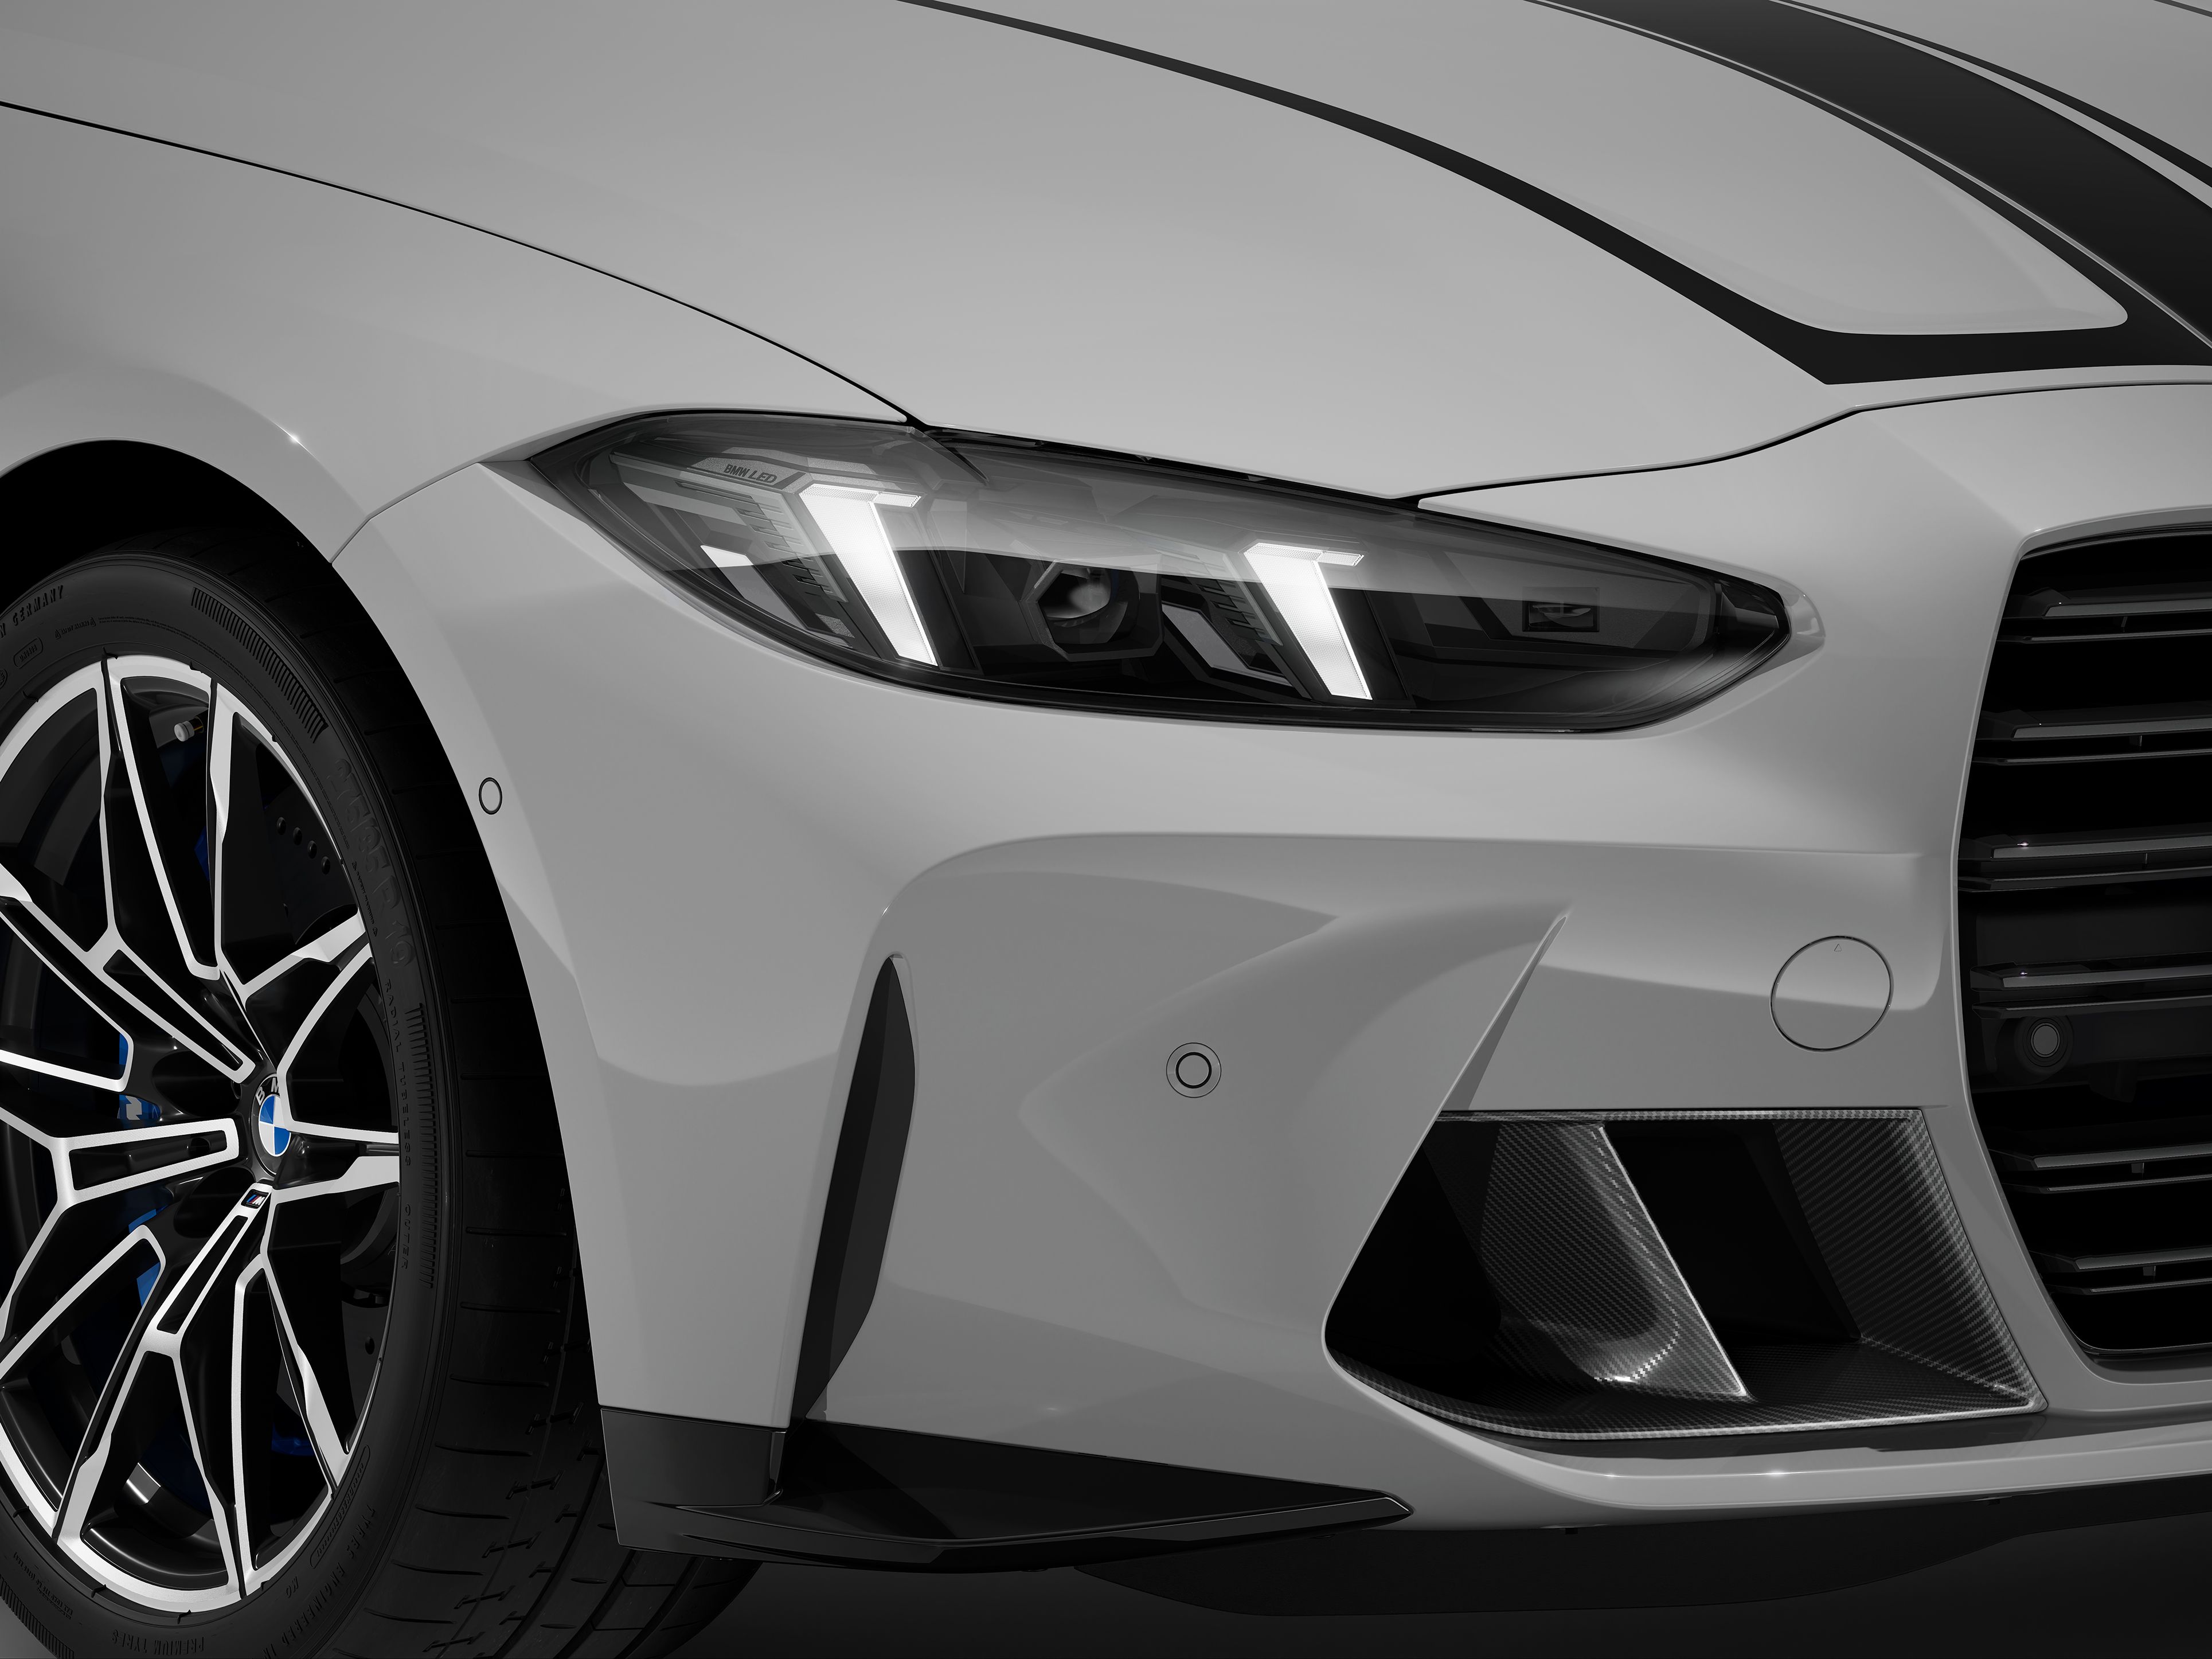 Adaptive LED headlights on the BMW M4 Coupe